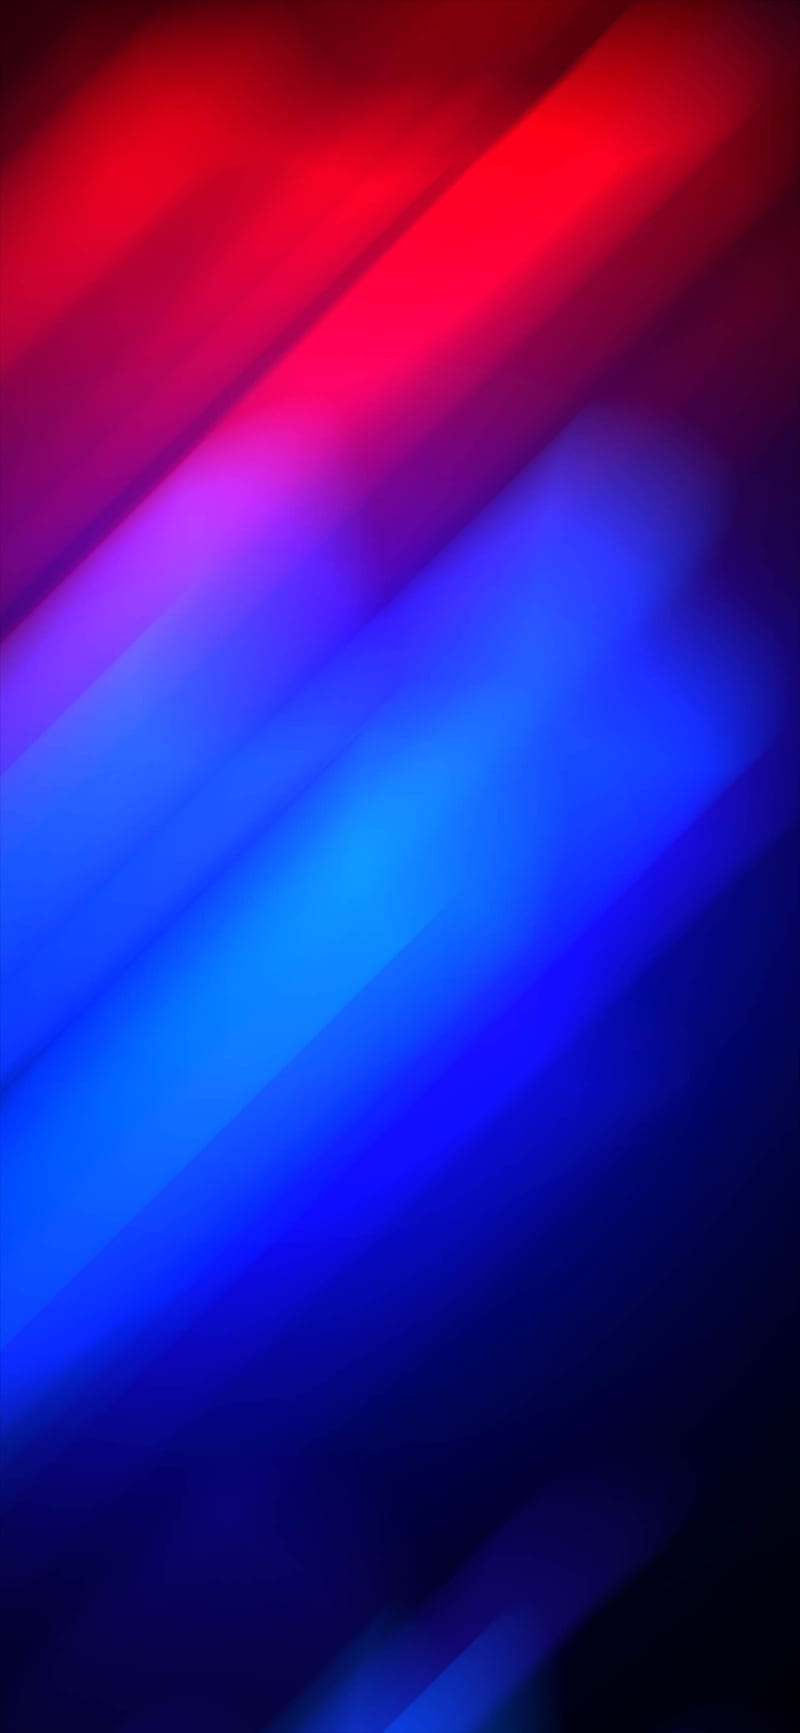 Neon Gradient, abstract, amoled, blue, colorful, dark, oled, red, surreal, HD phone wallpaper